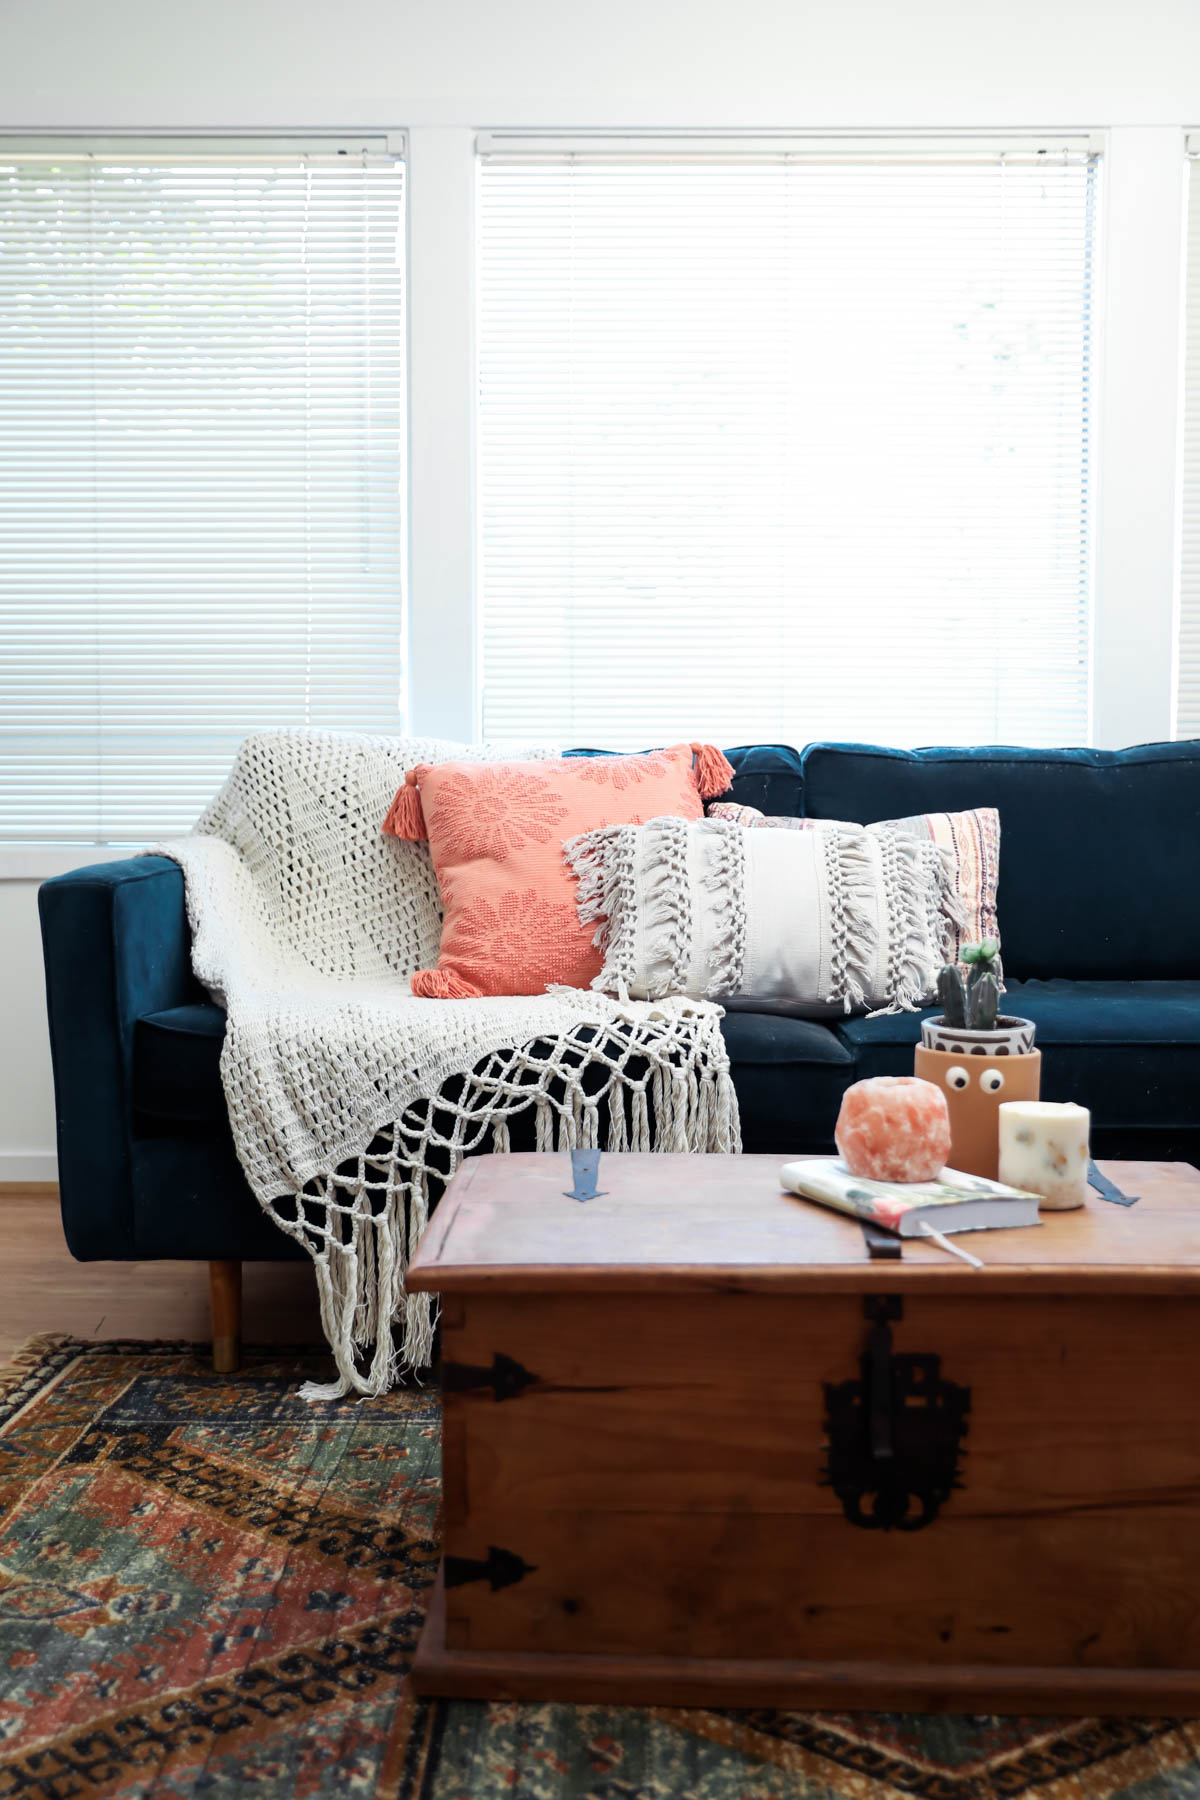 How to Update Your Living Room on a Budget